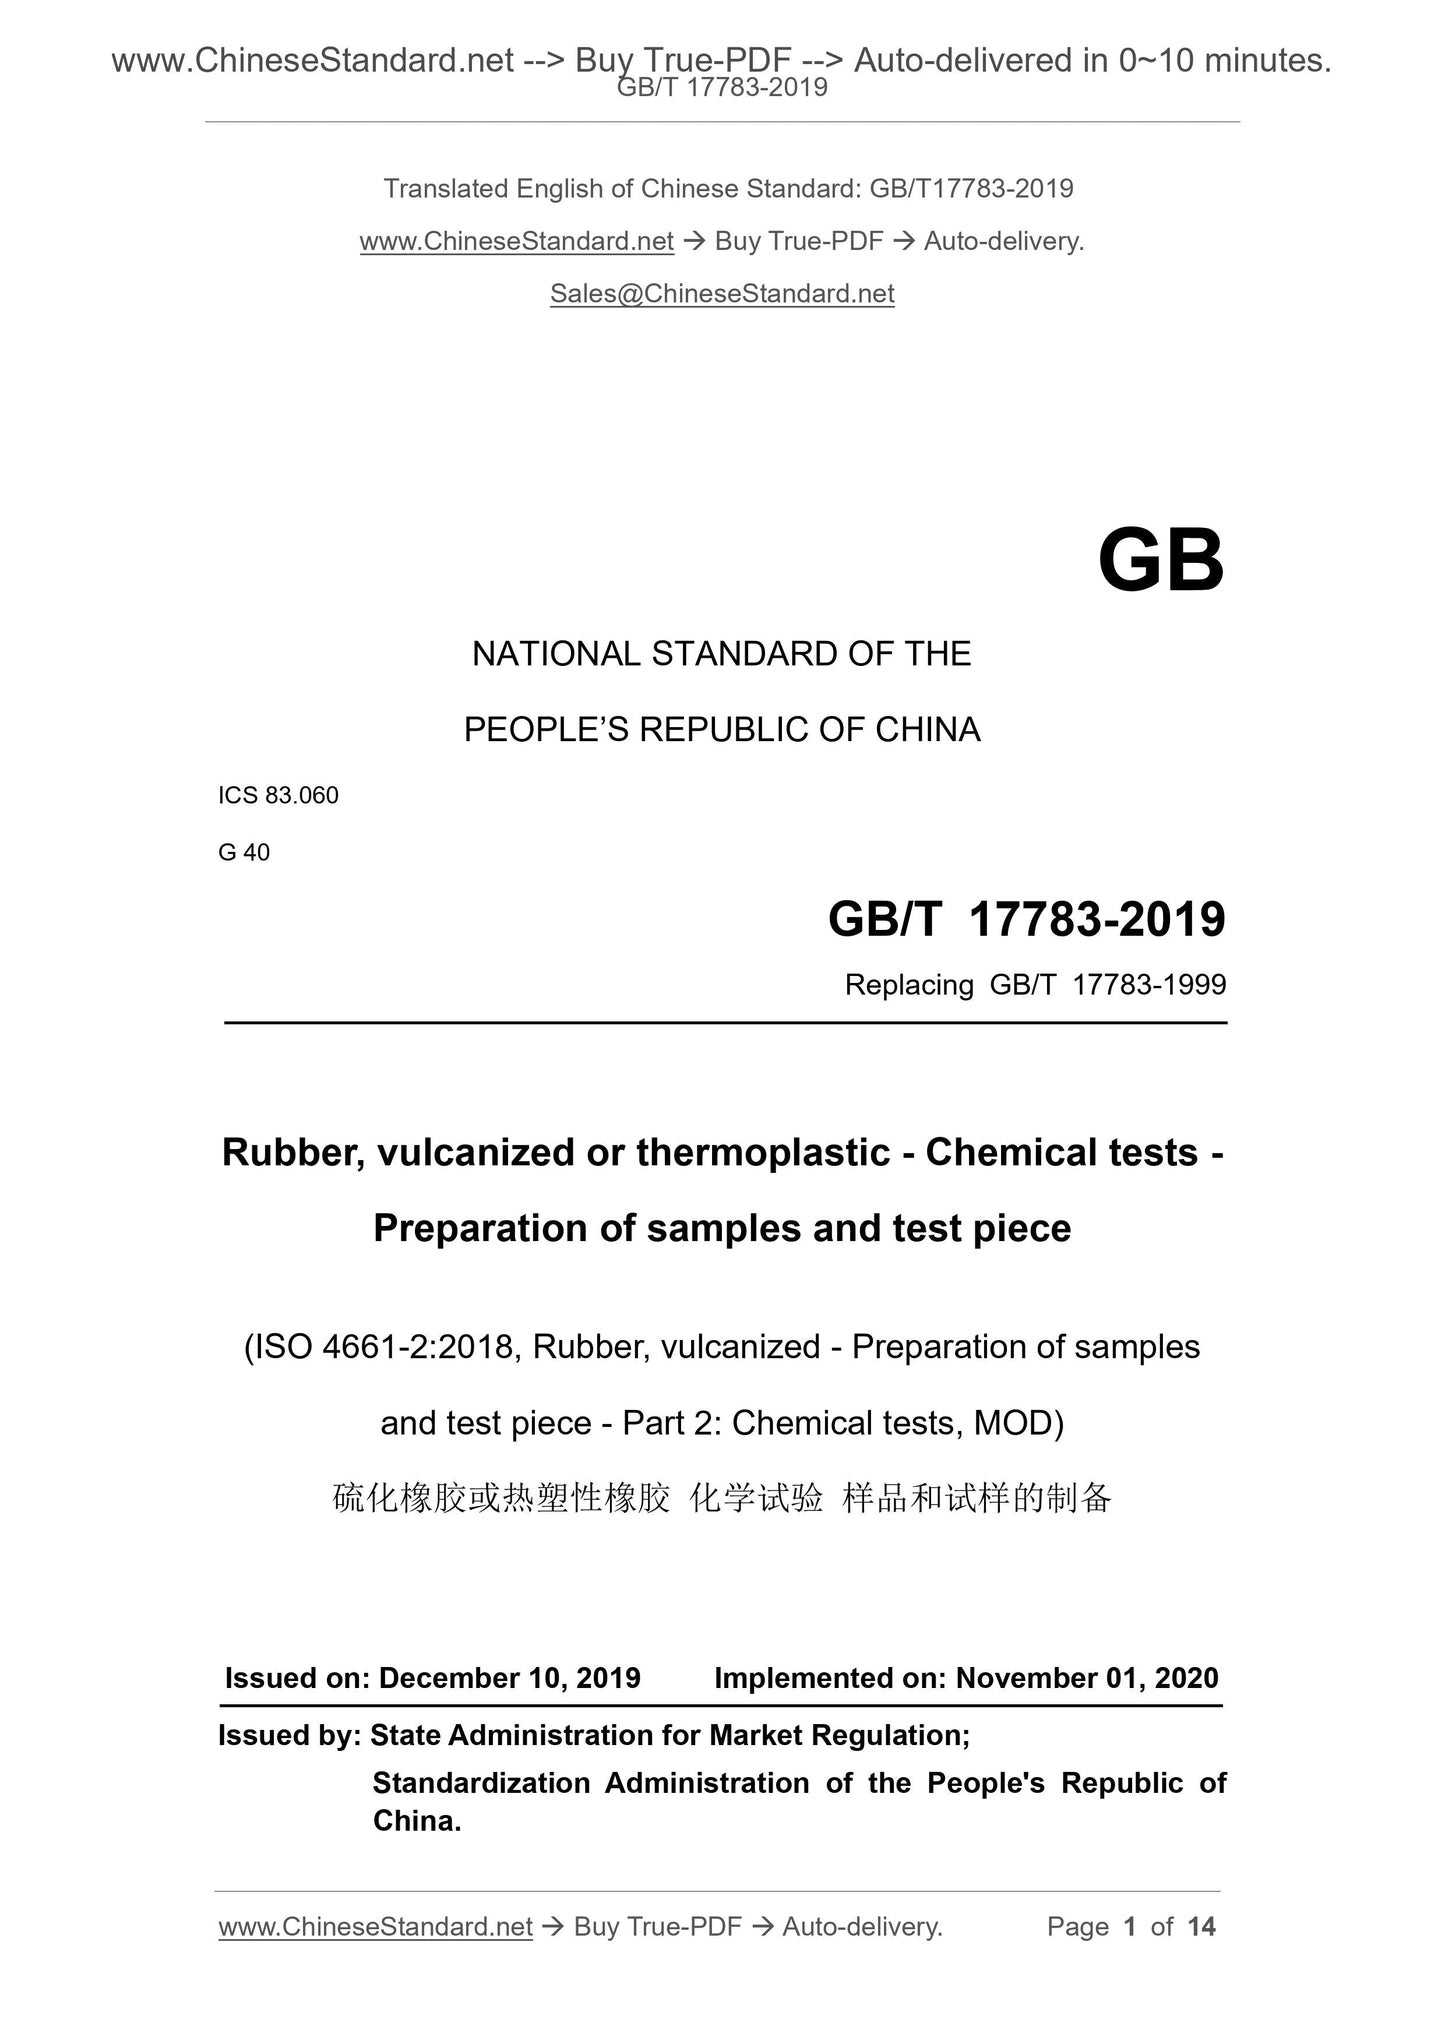 GB/T 17783-2019 Page 1